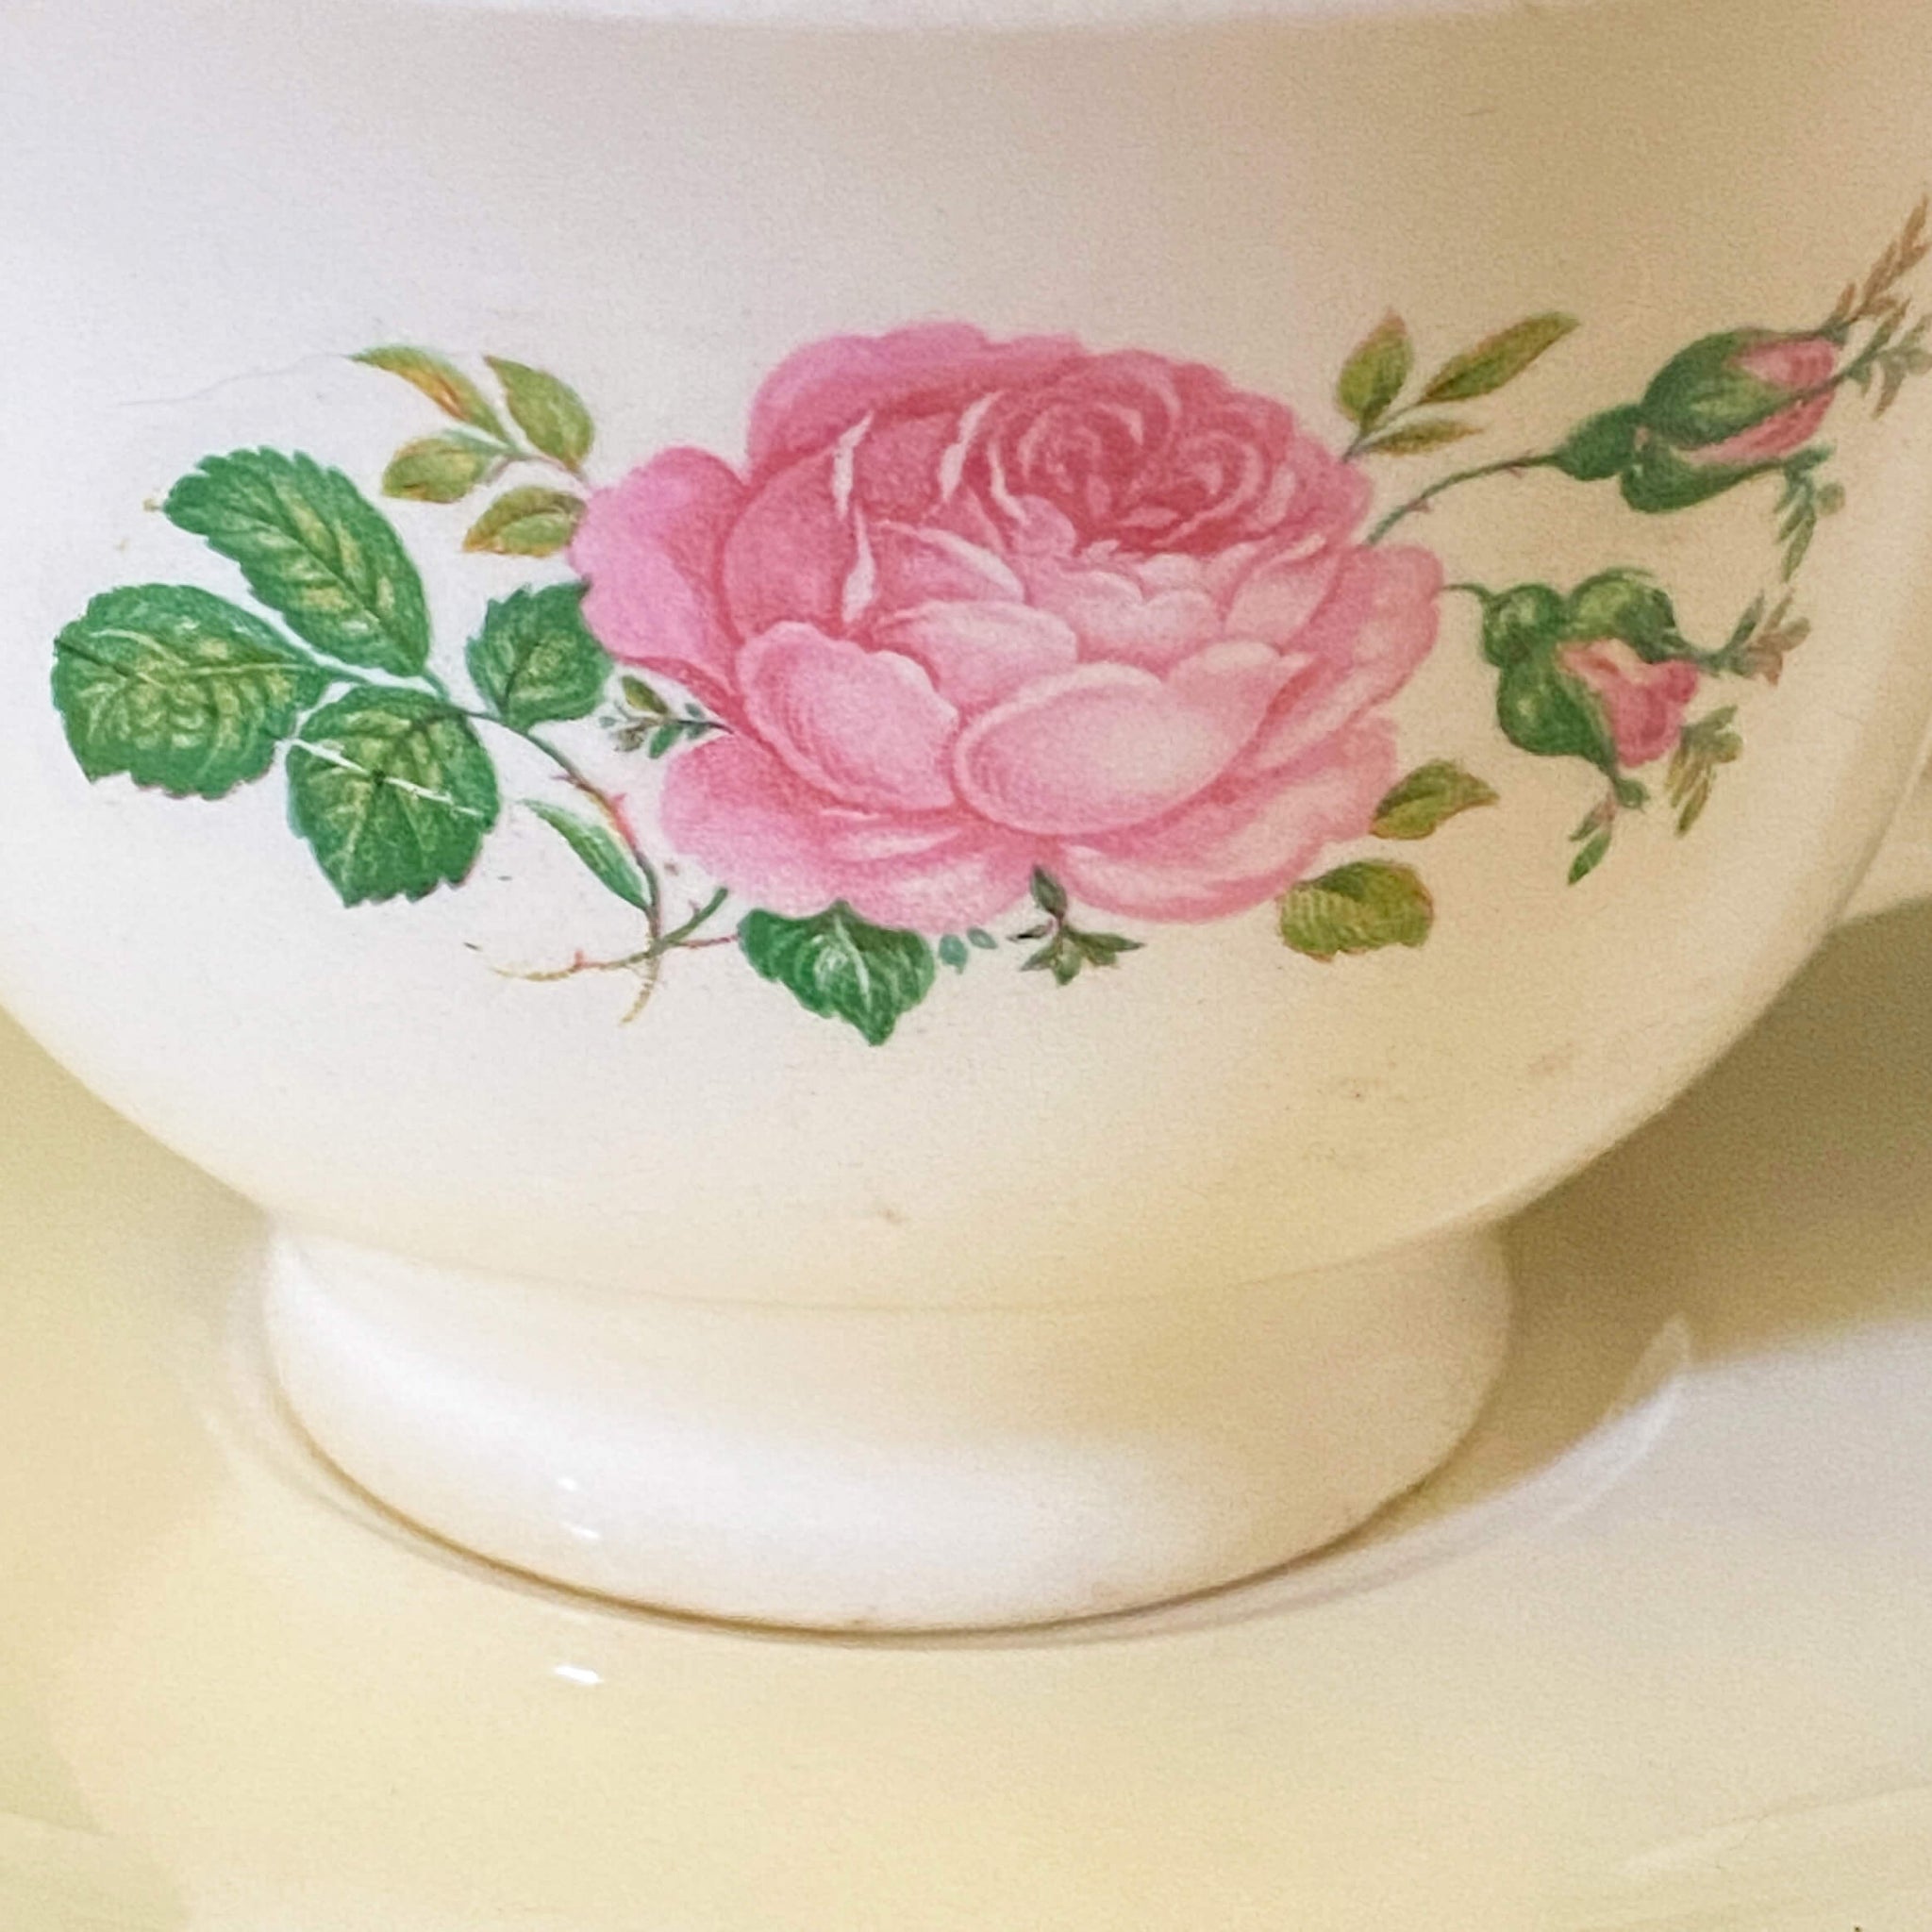 Vintage 1940s Pink Rose Teacups with Saucers - Taylor Smith Taylor circa 1948 - Set of Four